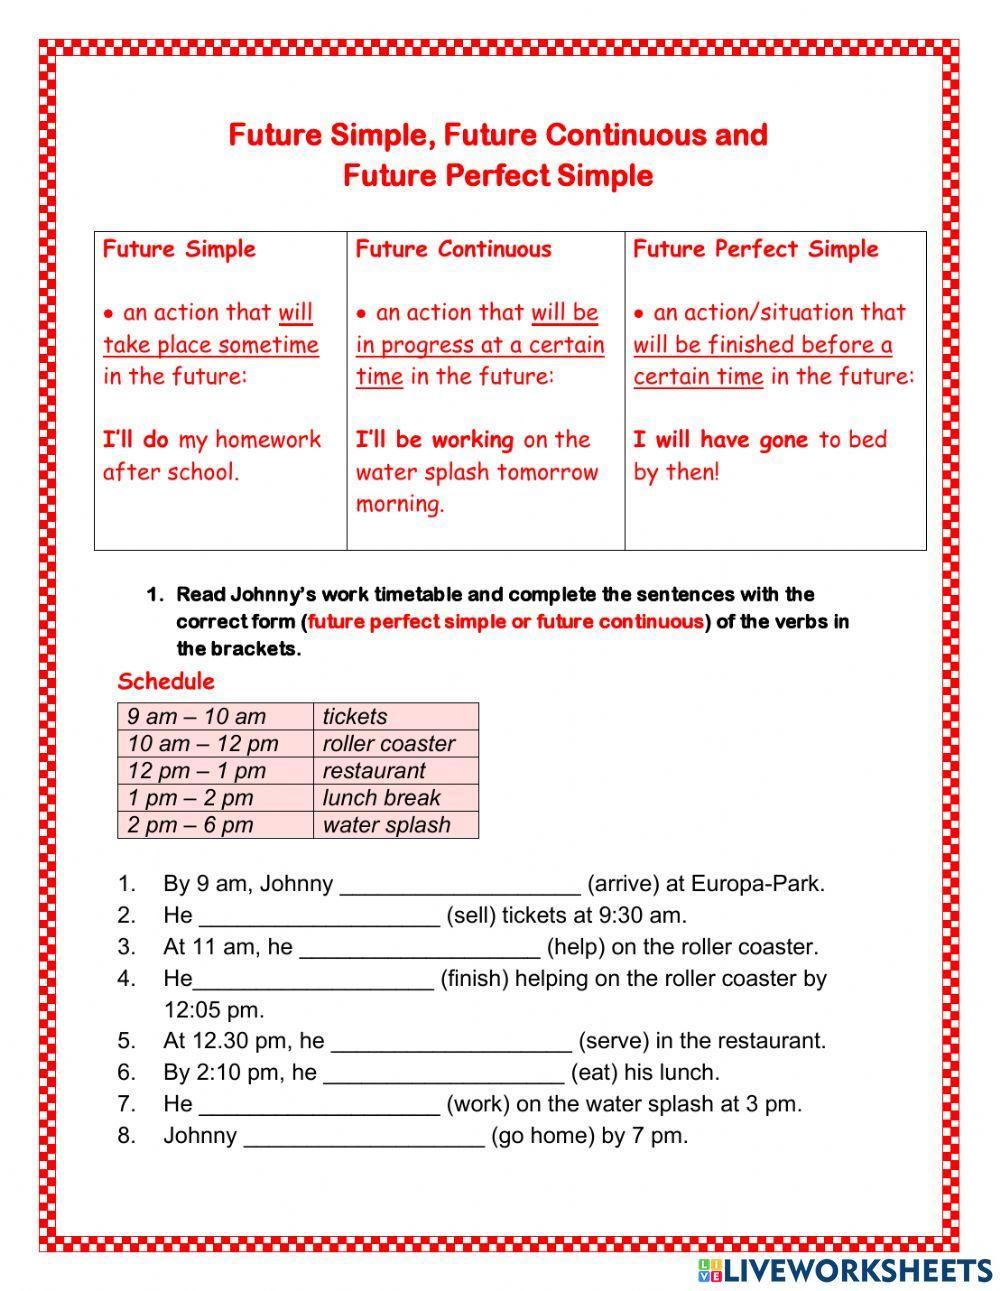 Future simple, future continuous and future perfect - worksheet 2